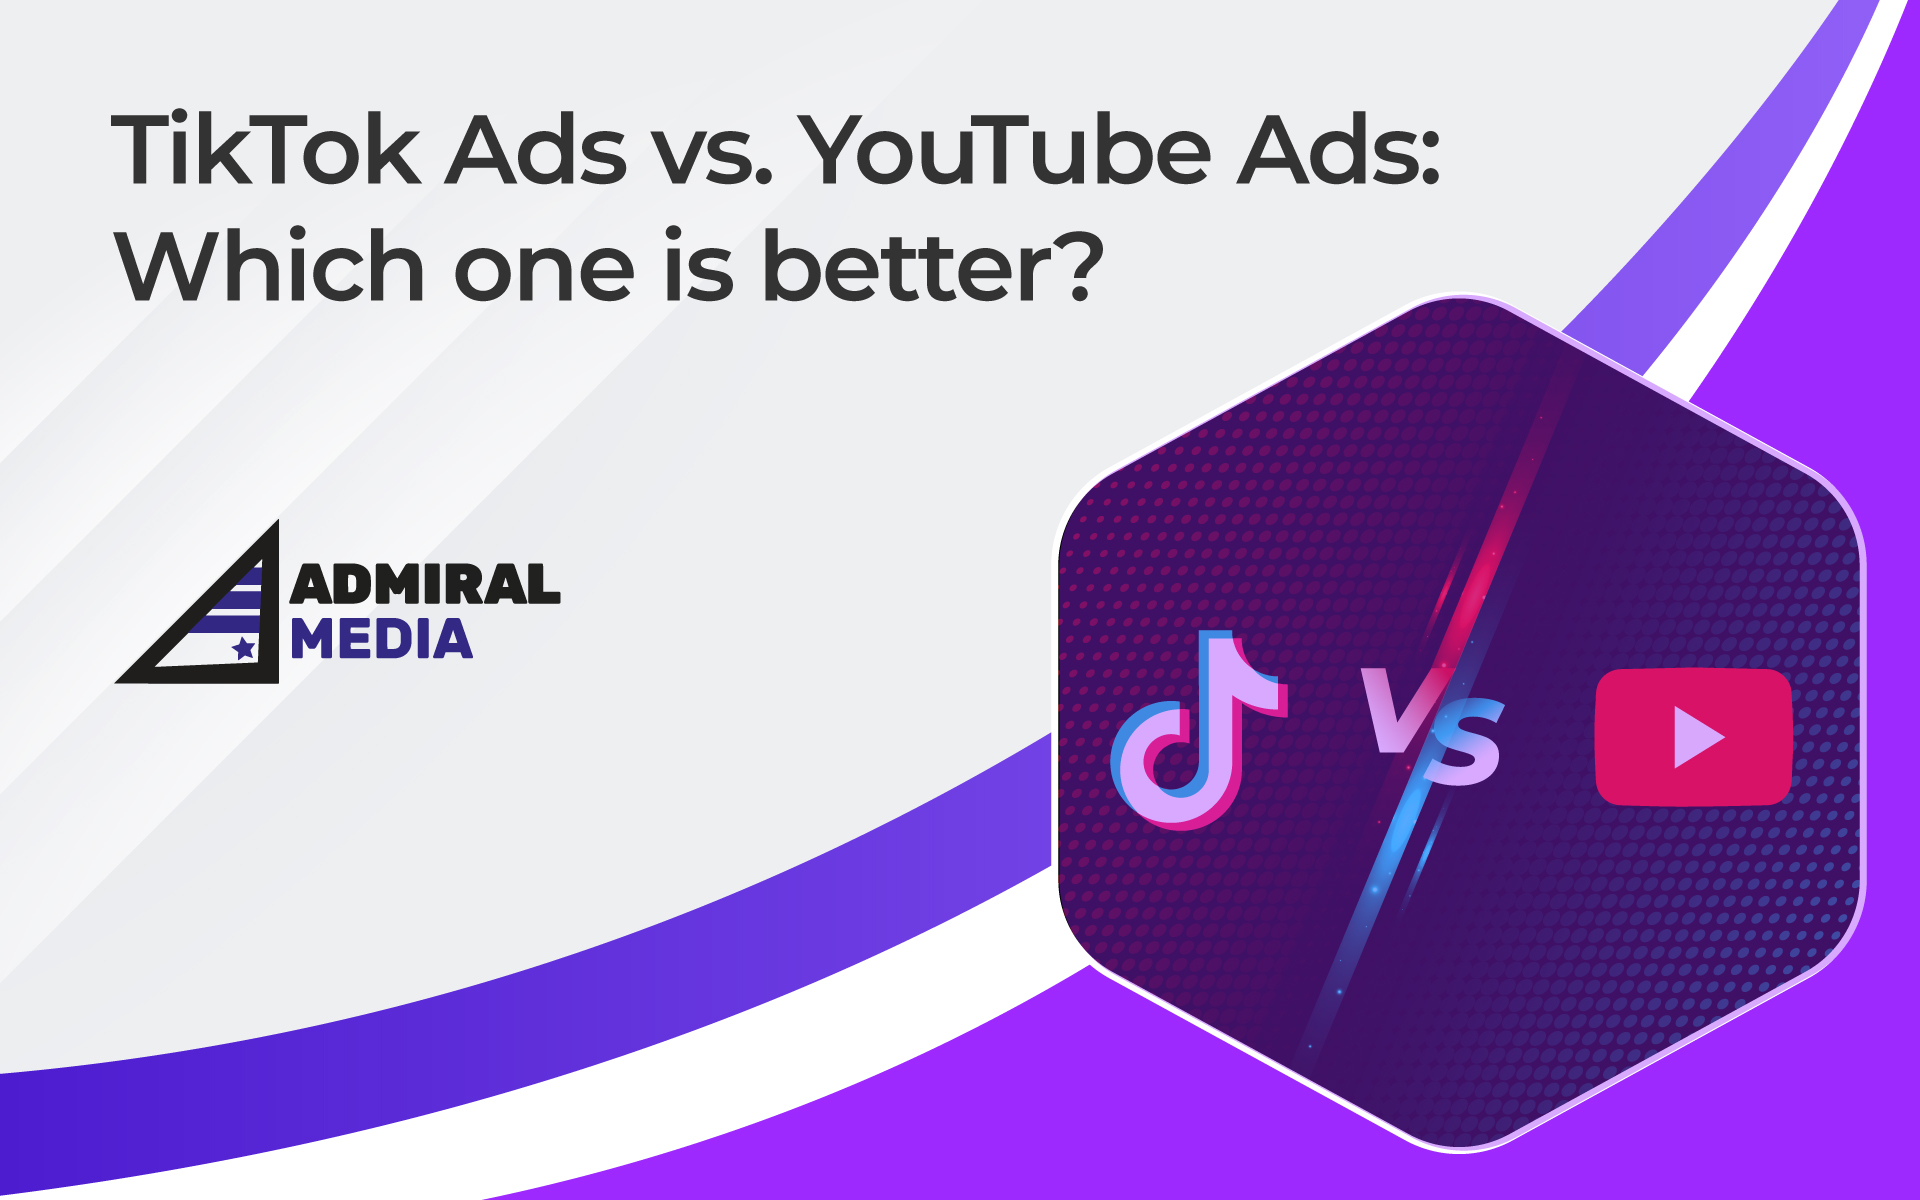 TikTok Ads vs. YouTube Ads: Which one is better?